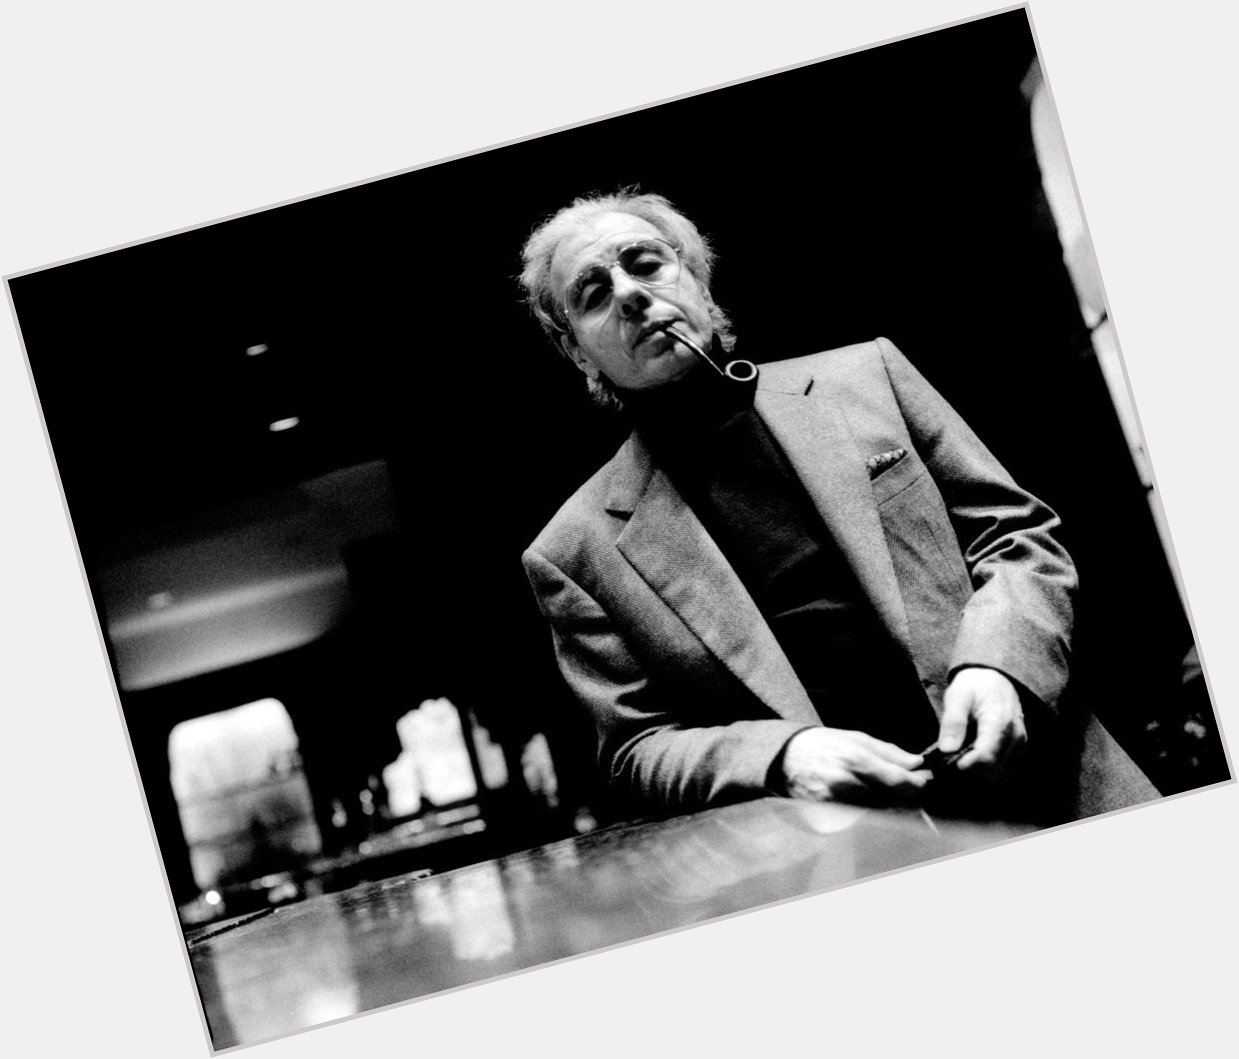 Happy birthday to the great Lalo Schifrin. 